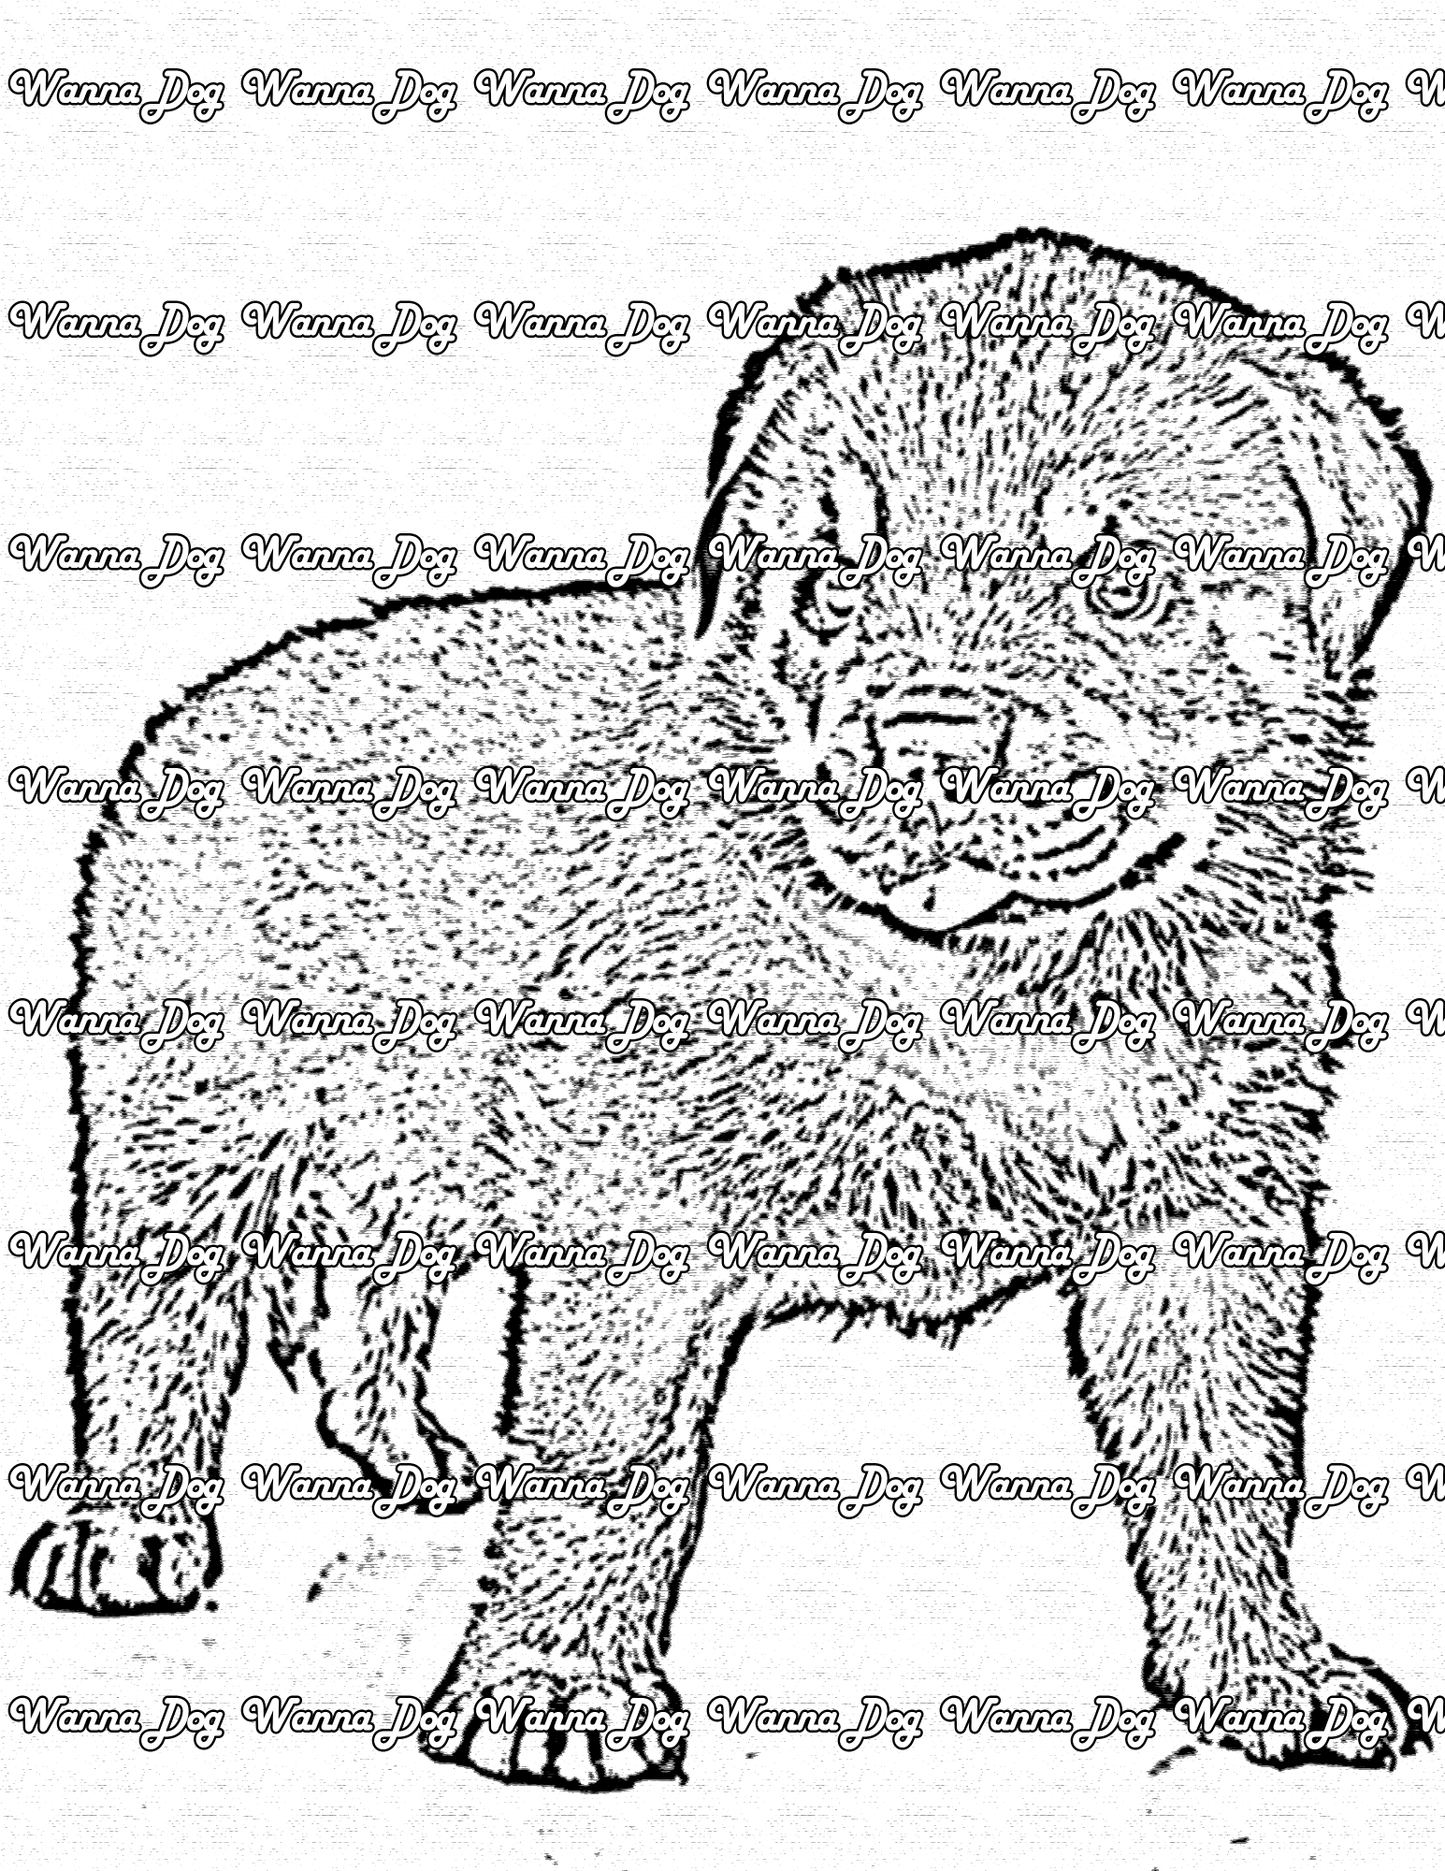 Rottweiler Coloring Page of a Rottweiler puppy standing